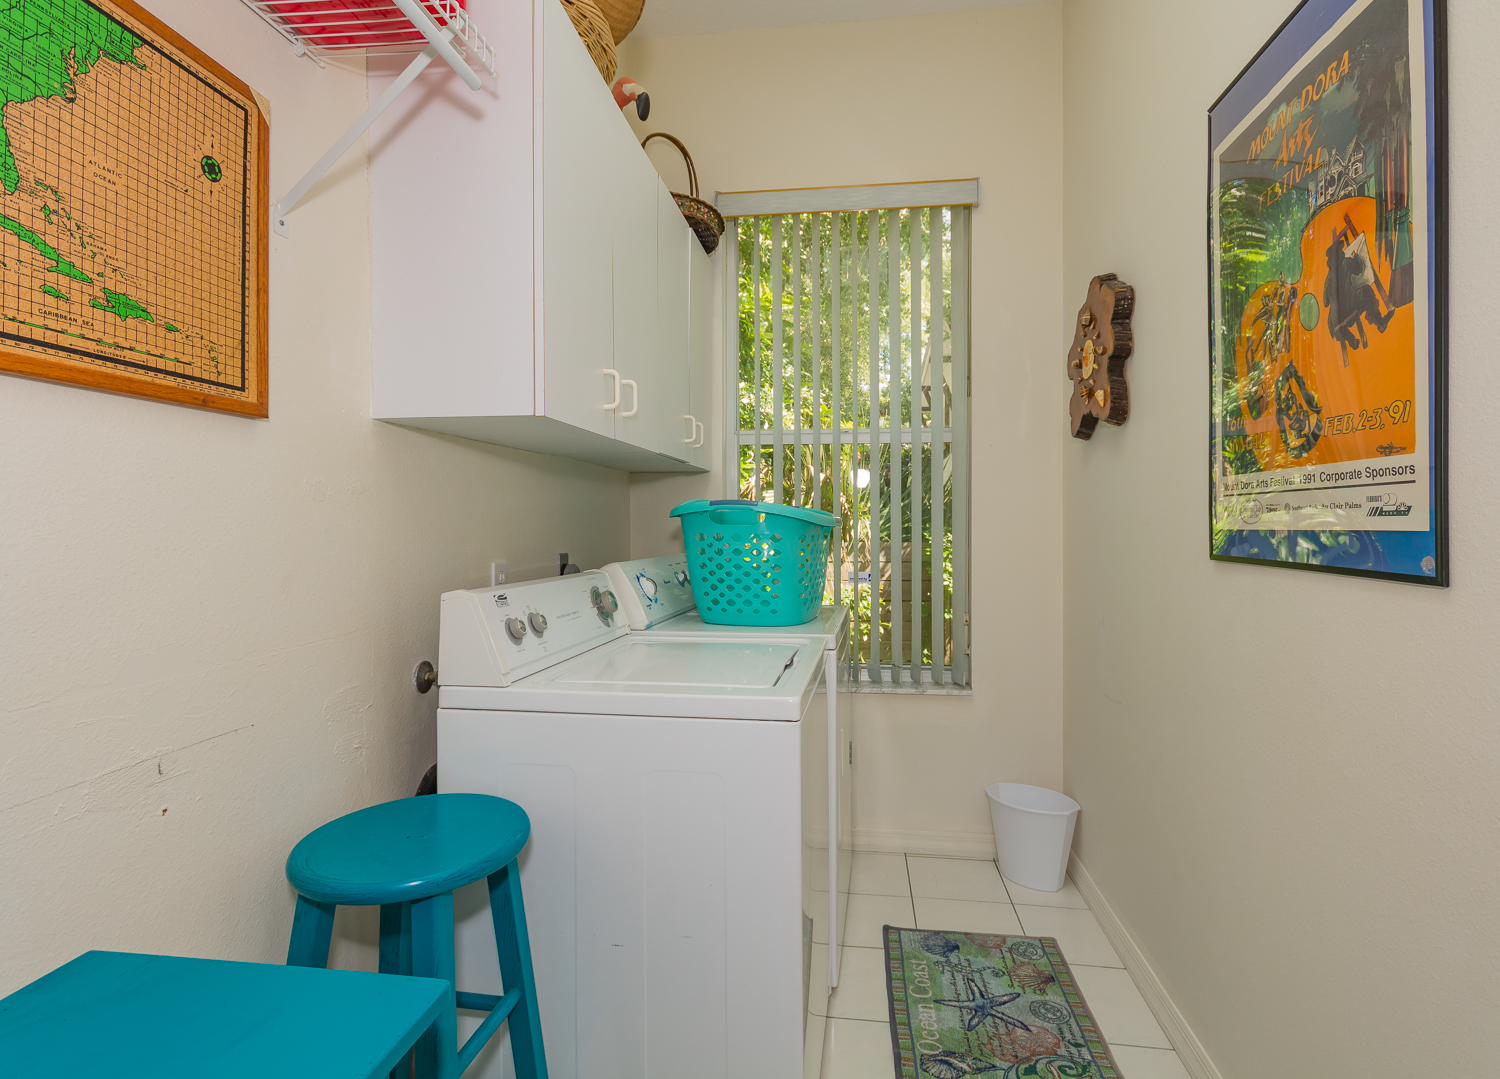 Laundry room with full sized washer and dryer.